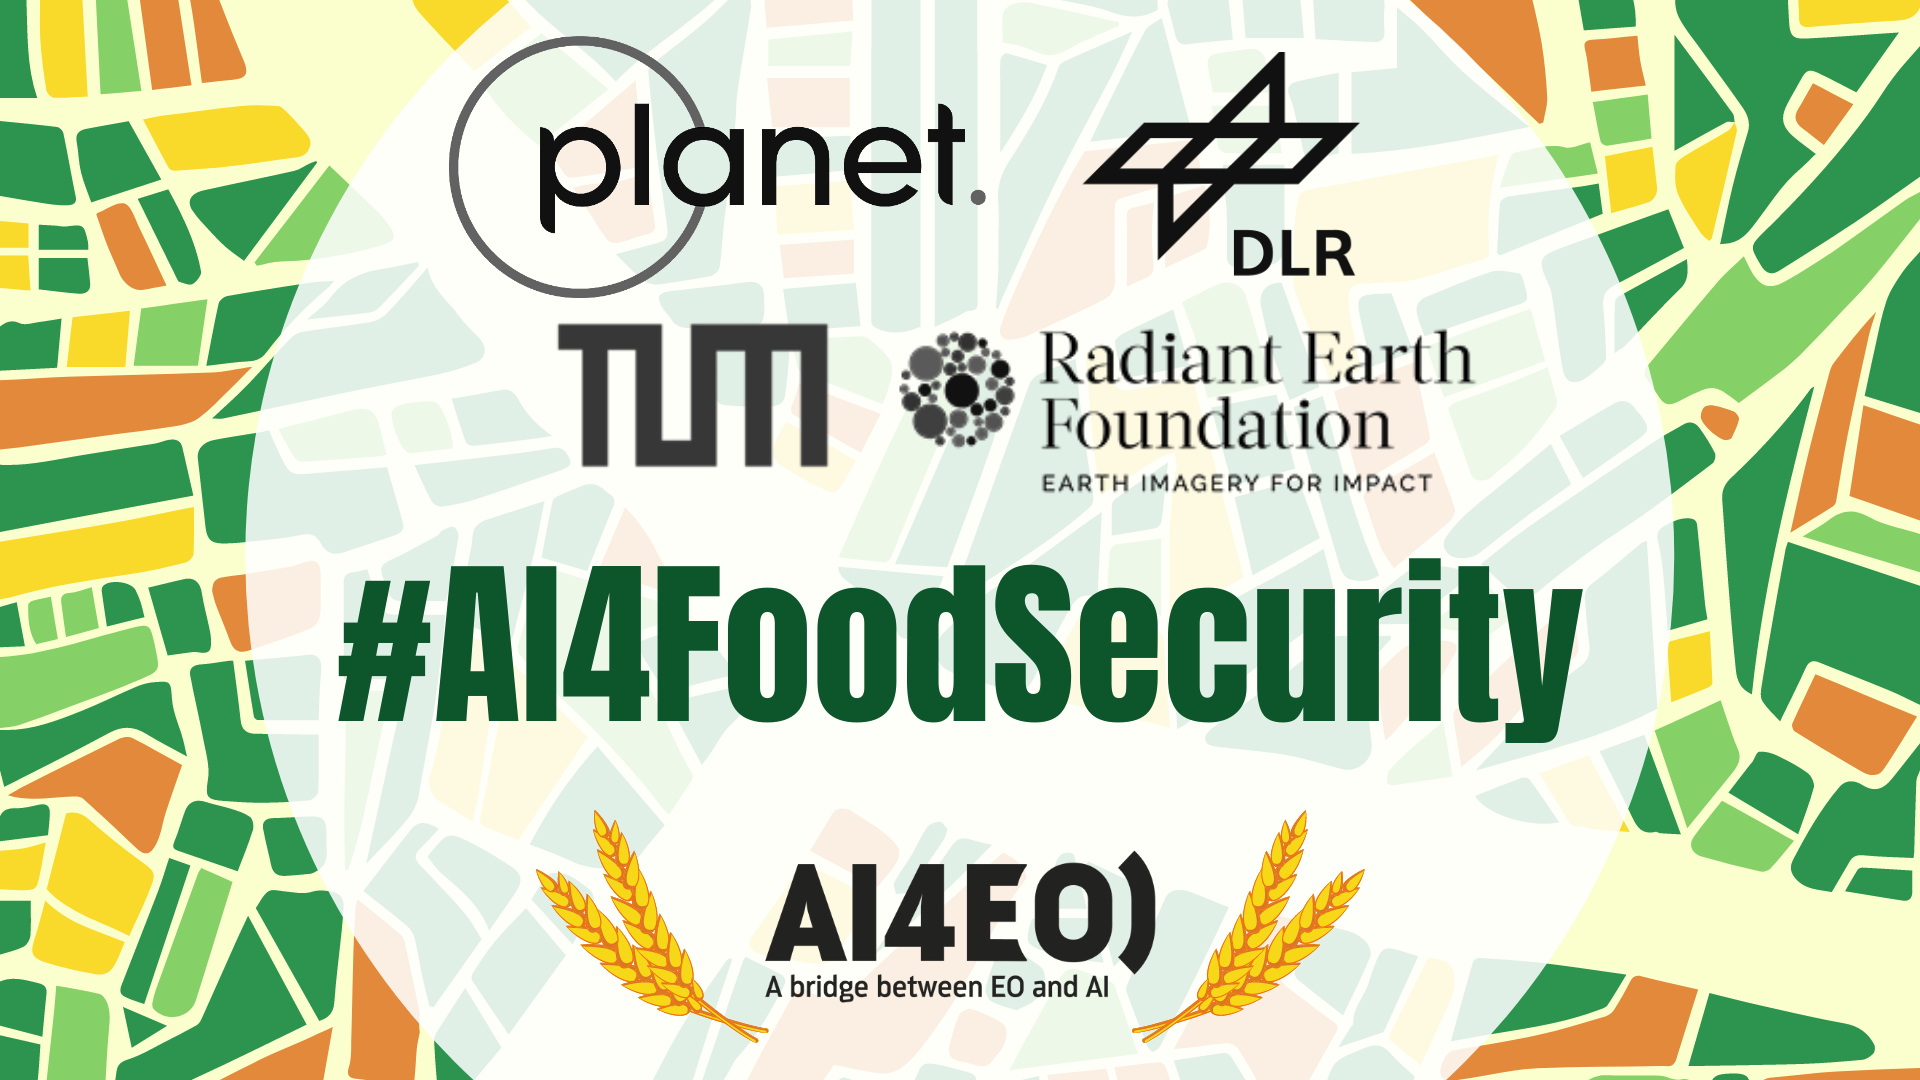 #AI4FoodSecurity challenge has been launched